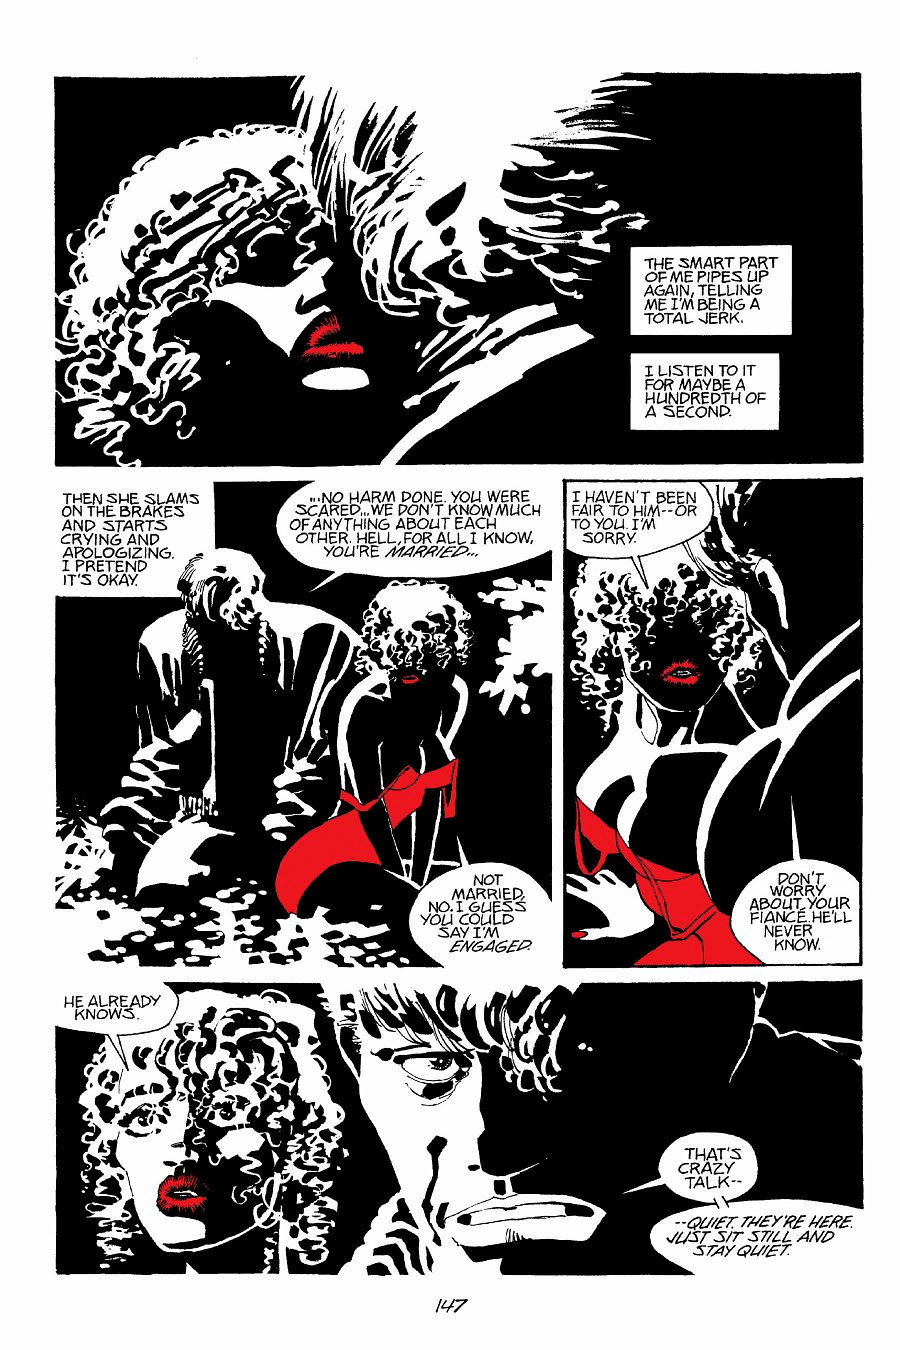 page 147 of sin city 6 booze broads and bullets